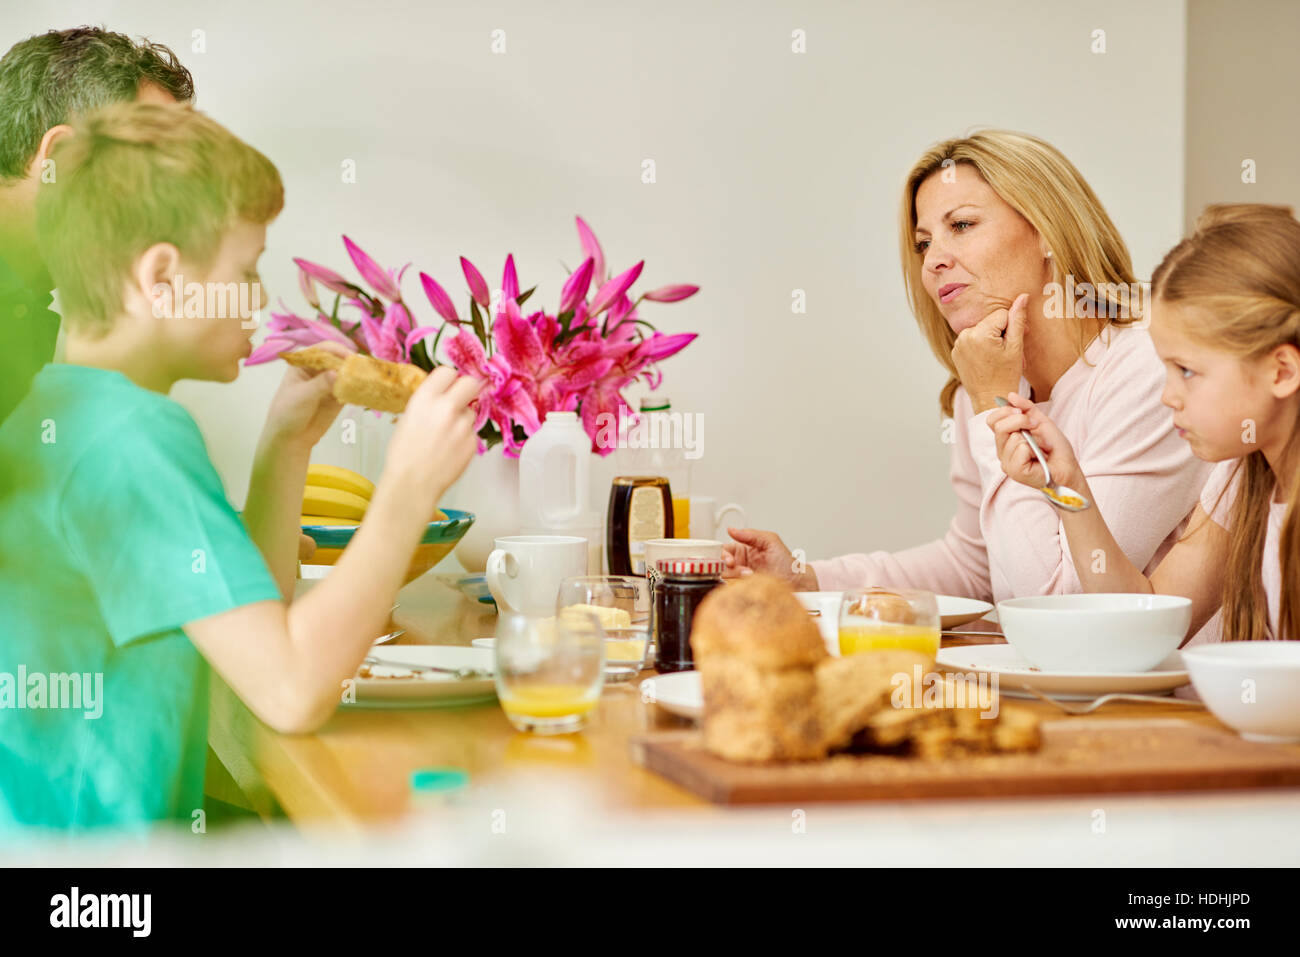 A family of four people, parents and two children eating breakfast. Stock Photo